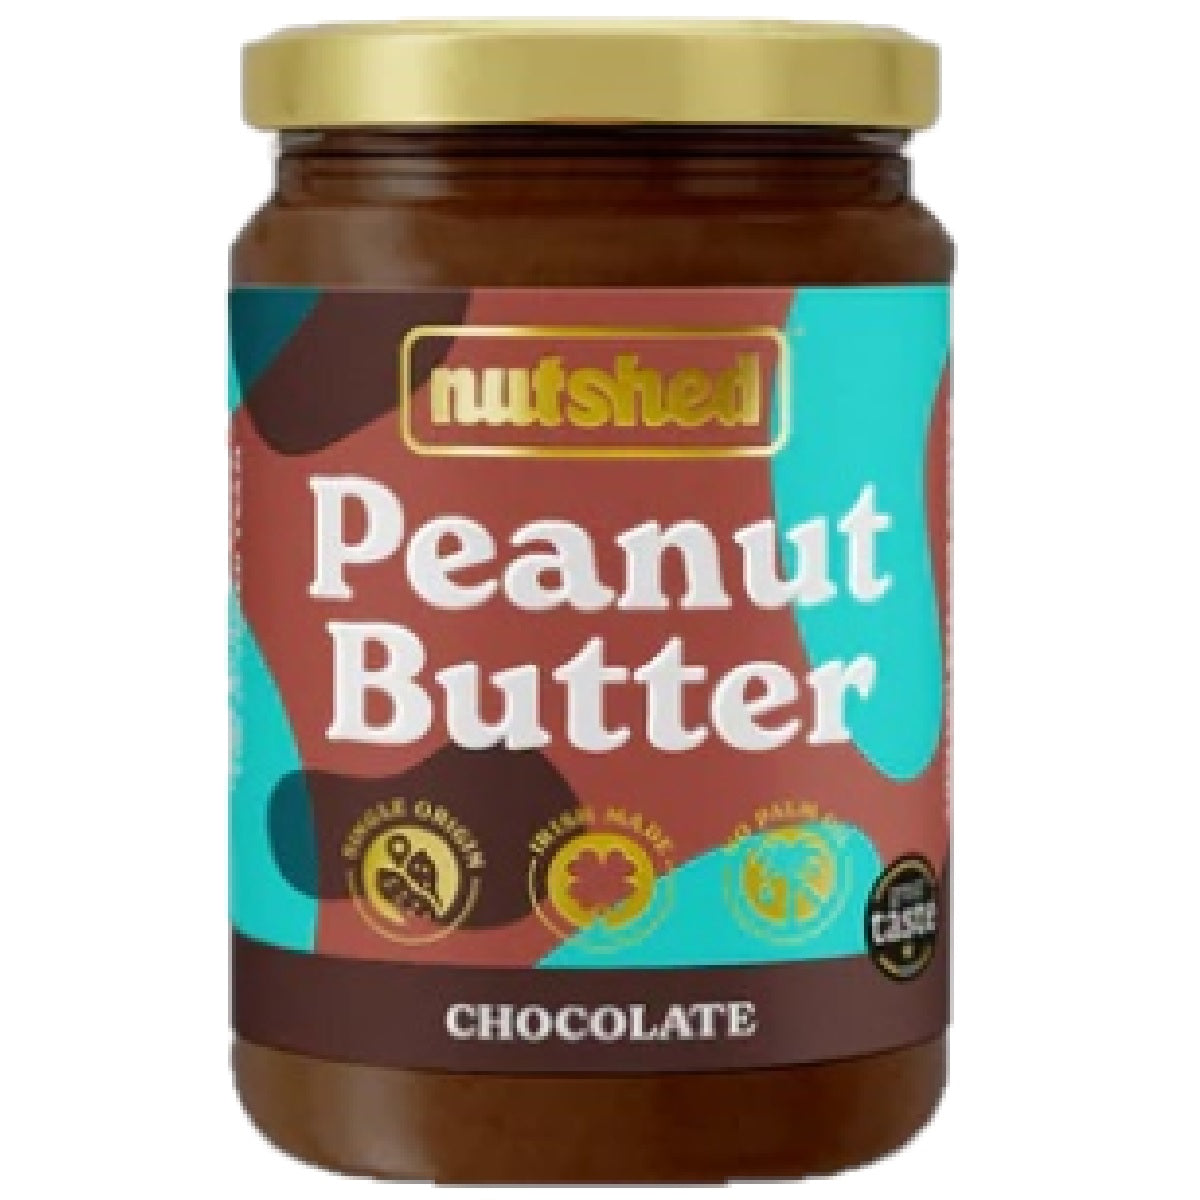 Nutshed Peanut Butter Chocolate 290g